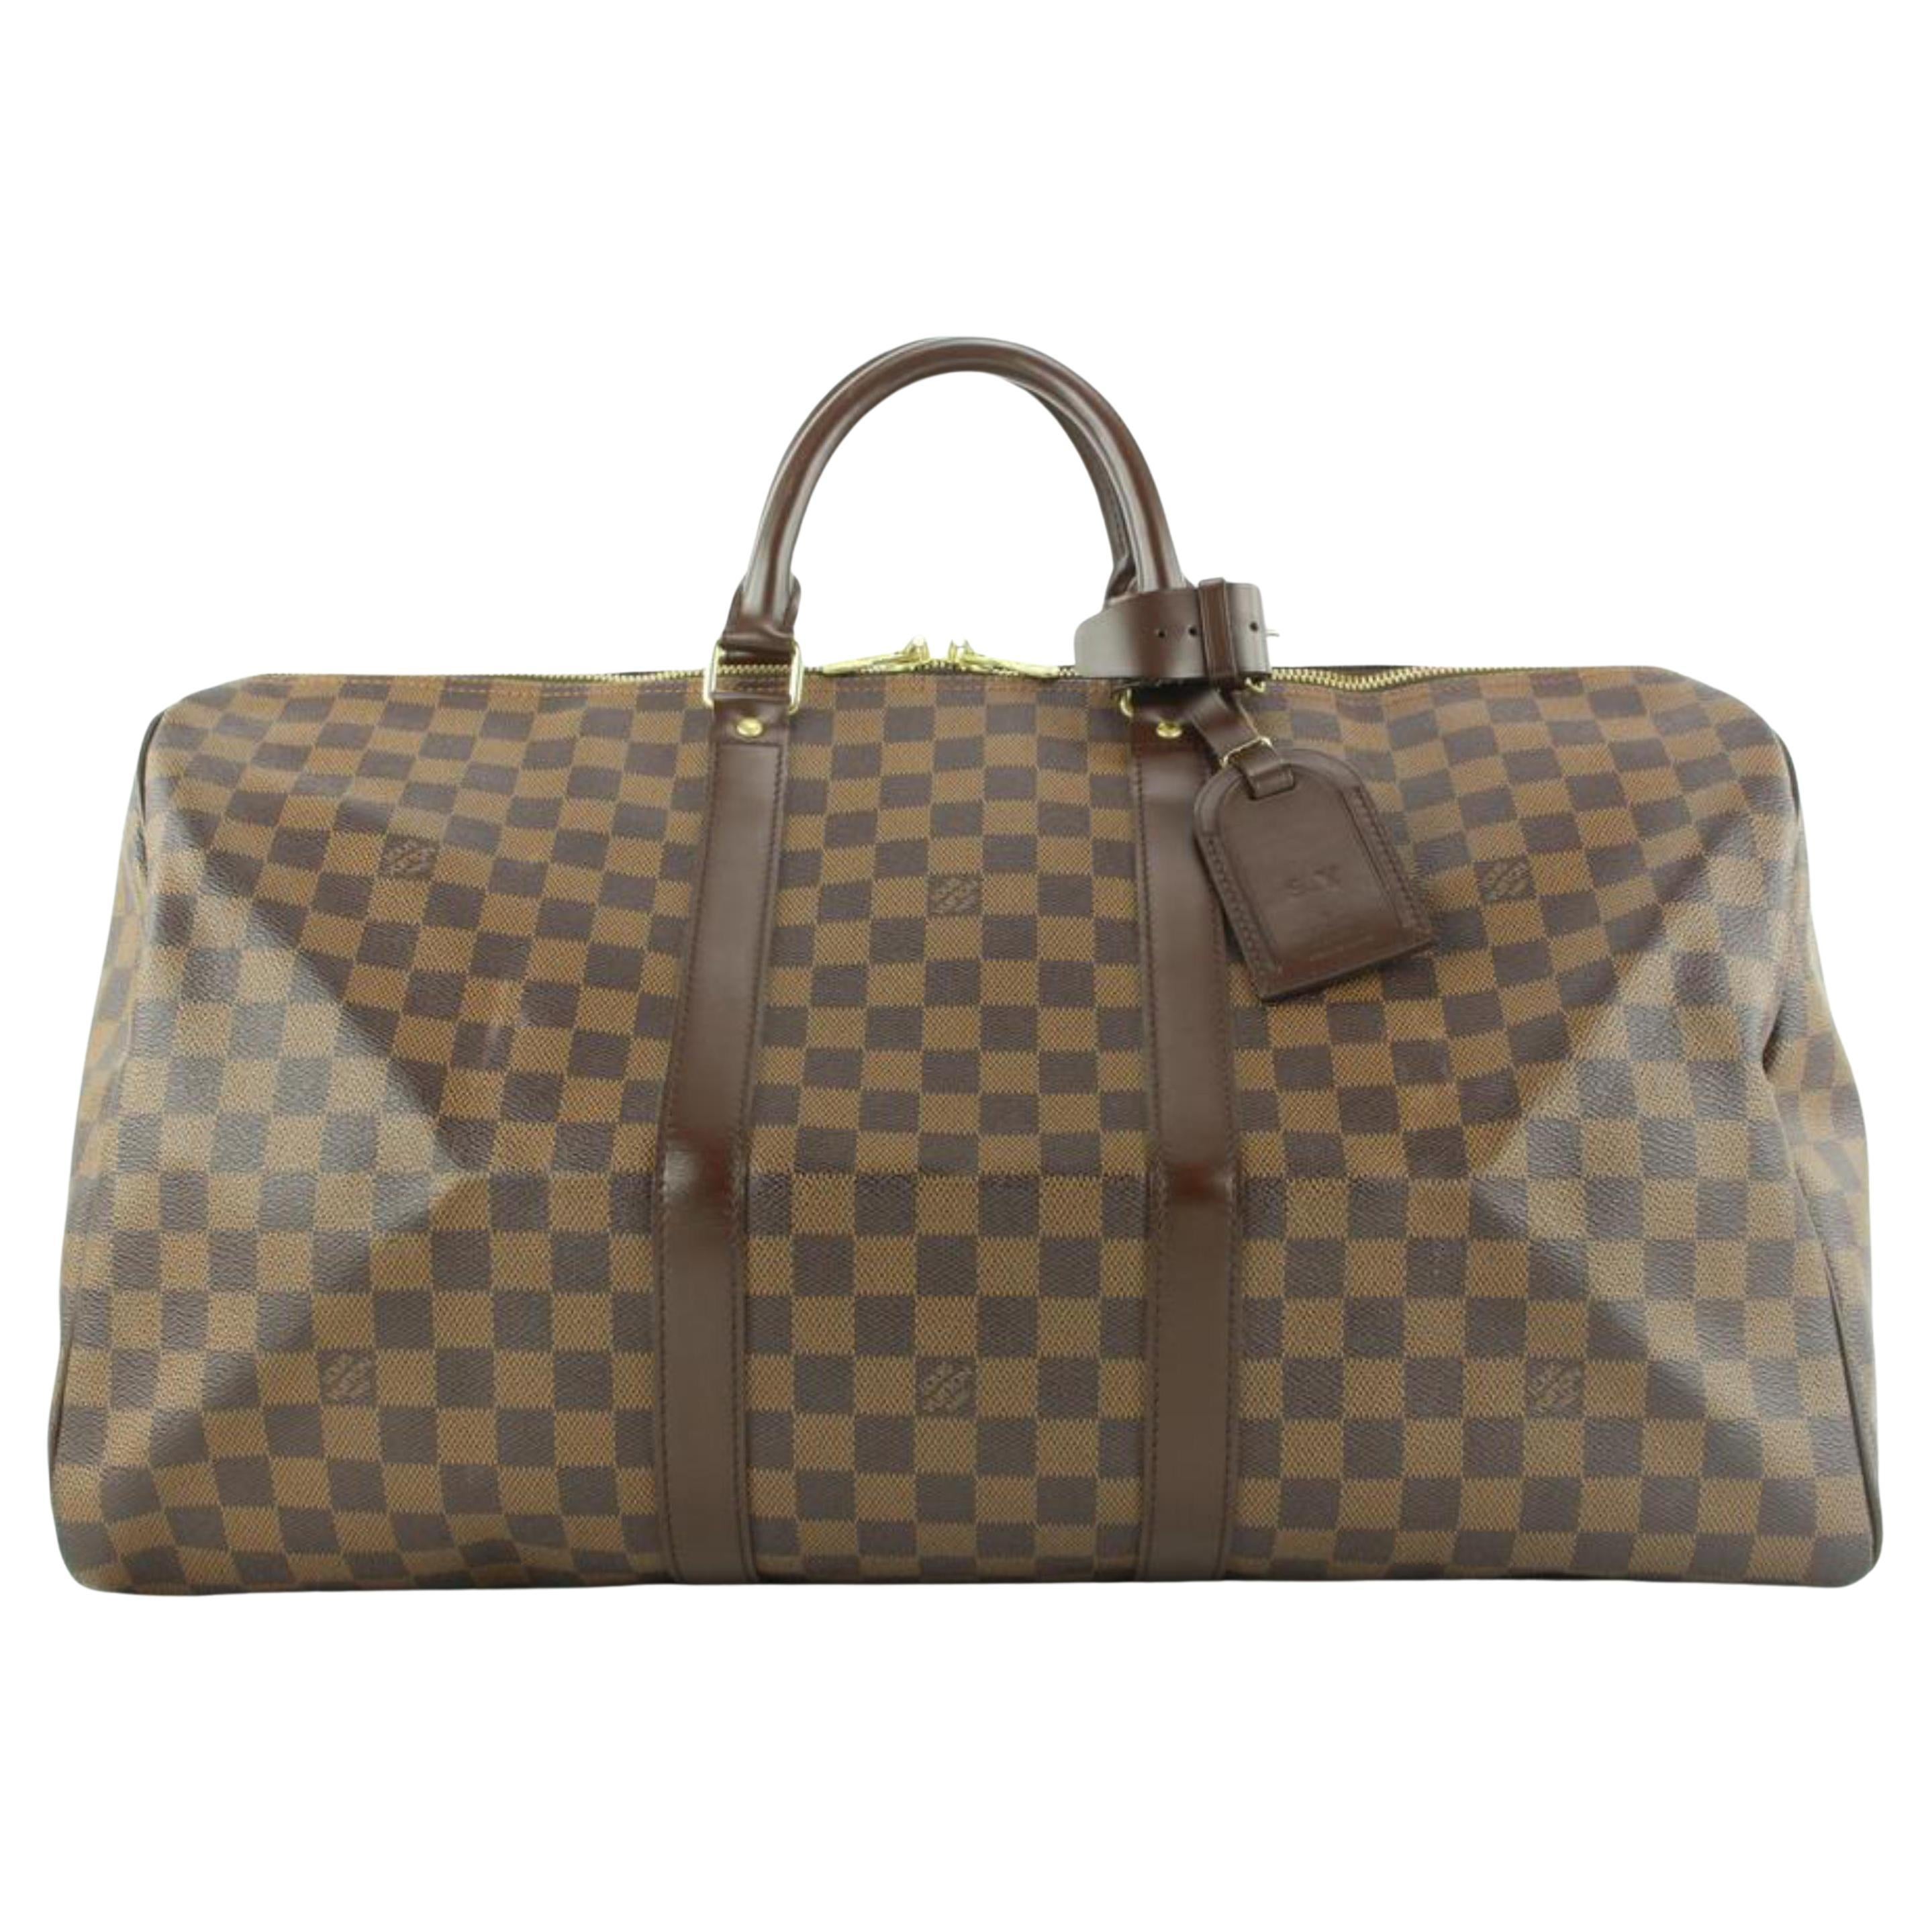 I spent a lot of money on Louis Vuitton luggage in damier, and now